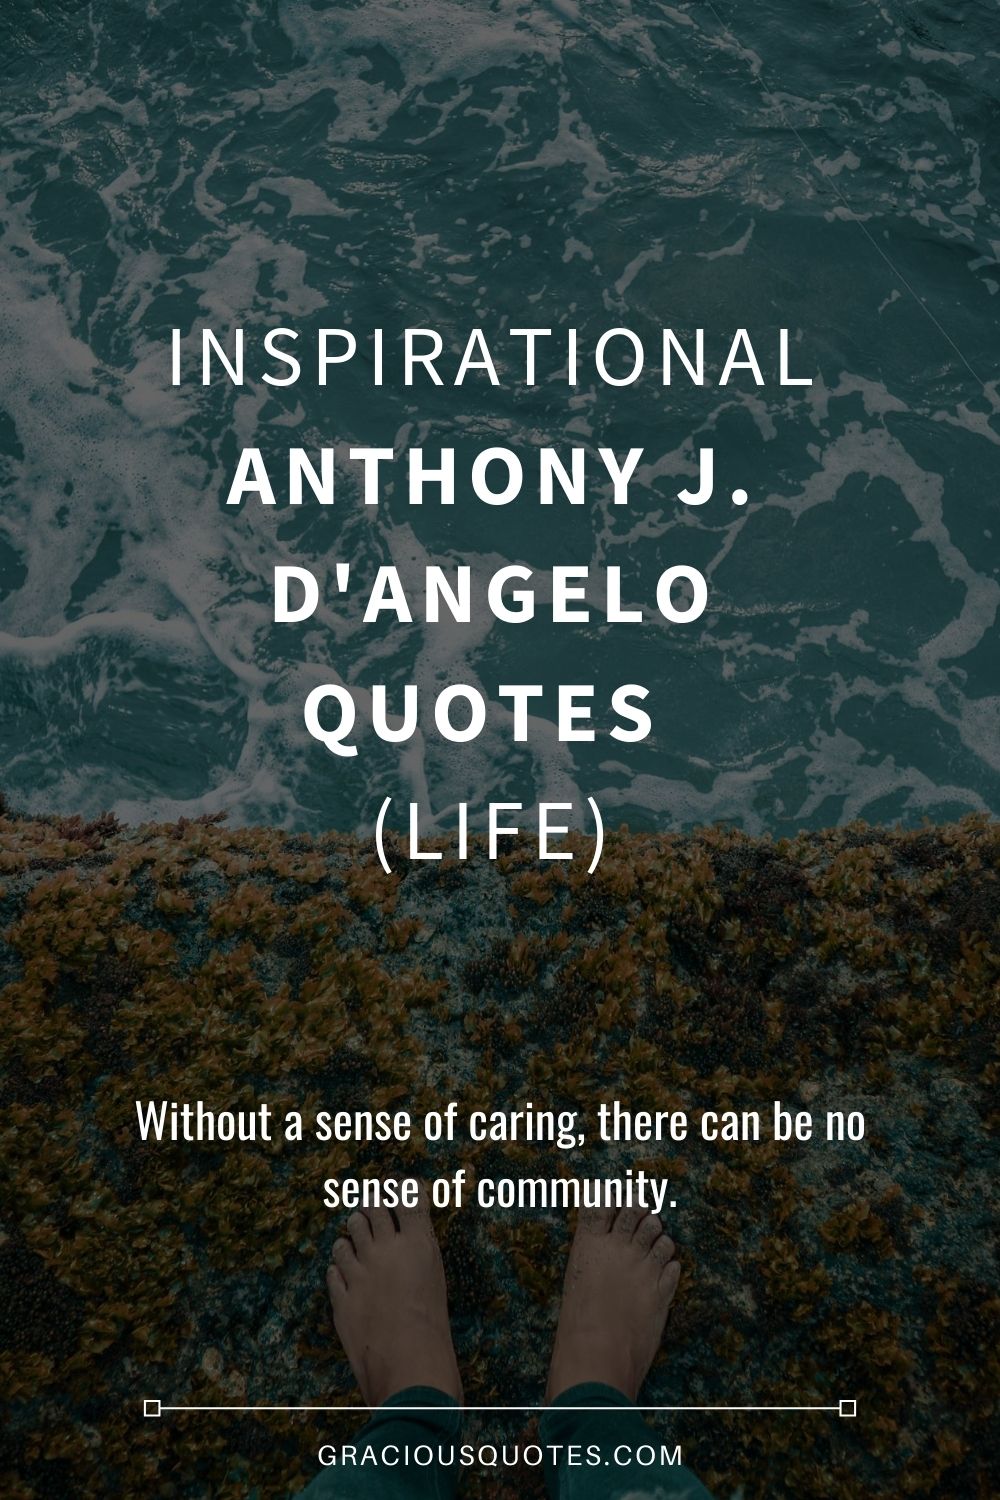 Inspirational Anthony J. D'Angelo Quotes (LIFE) - Gracious Quotes